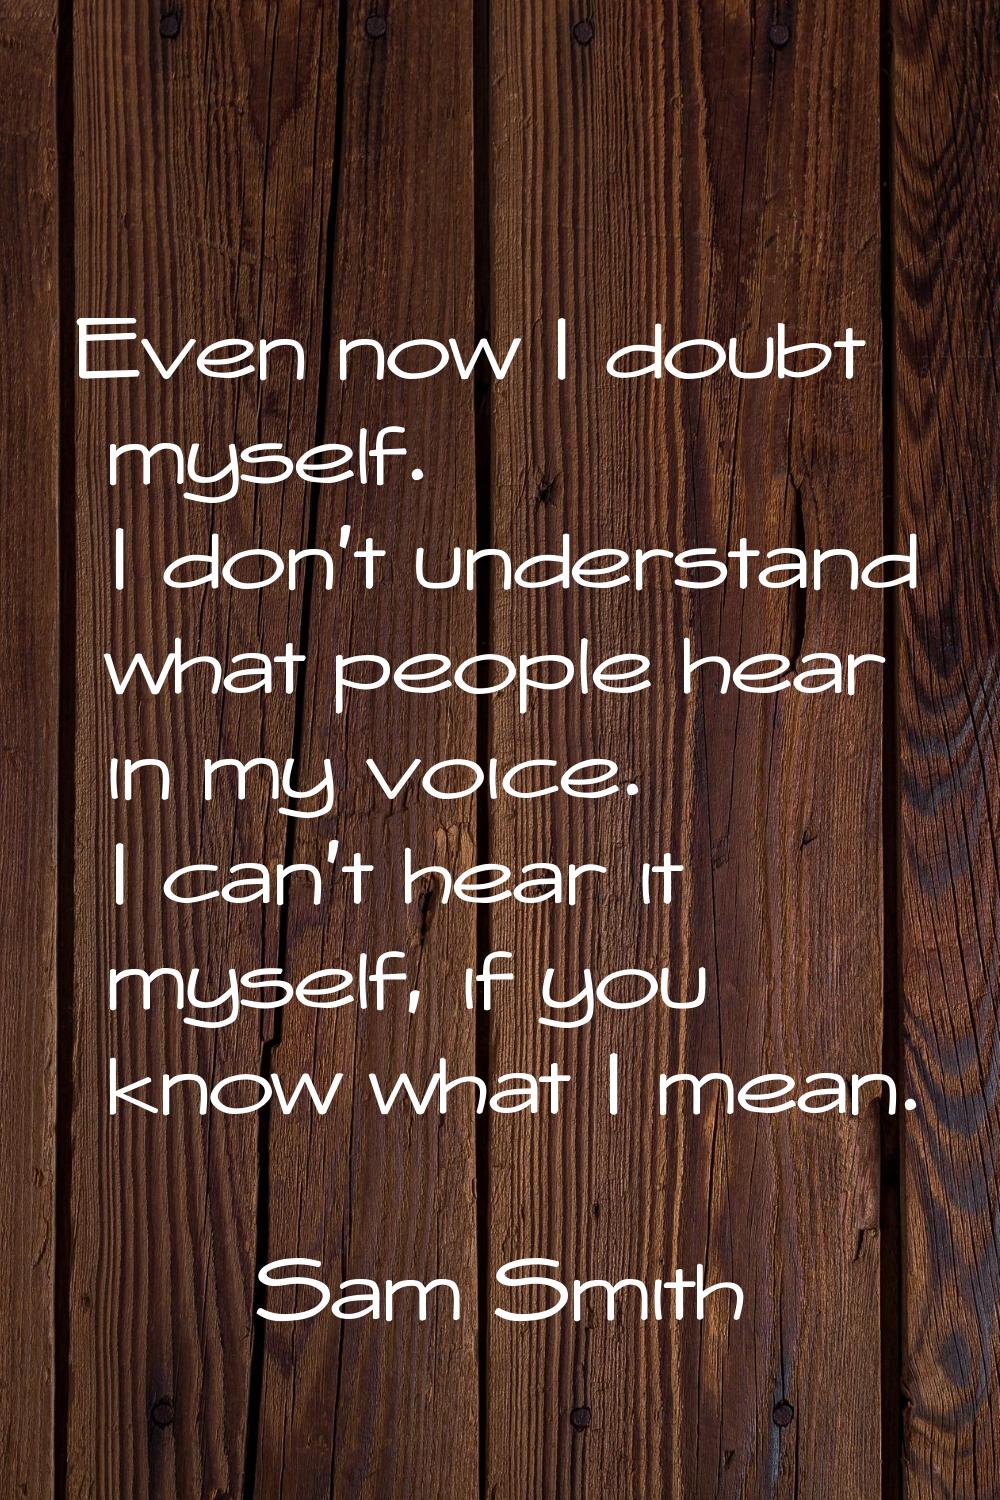 Even now I doubt myself. I don't understand what people hear in my voice. I can't hear it myself, i